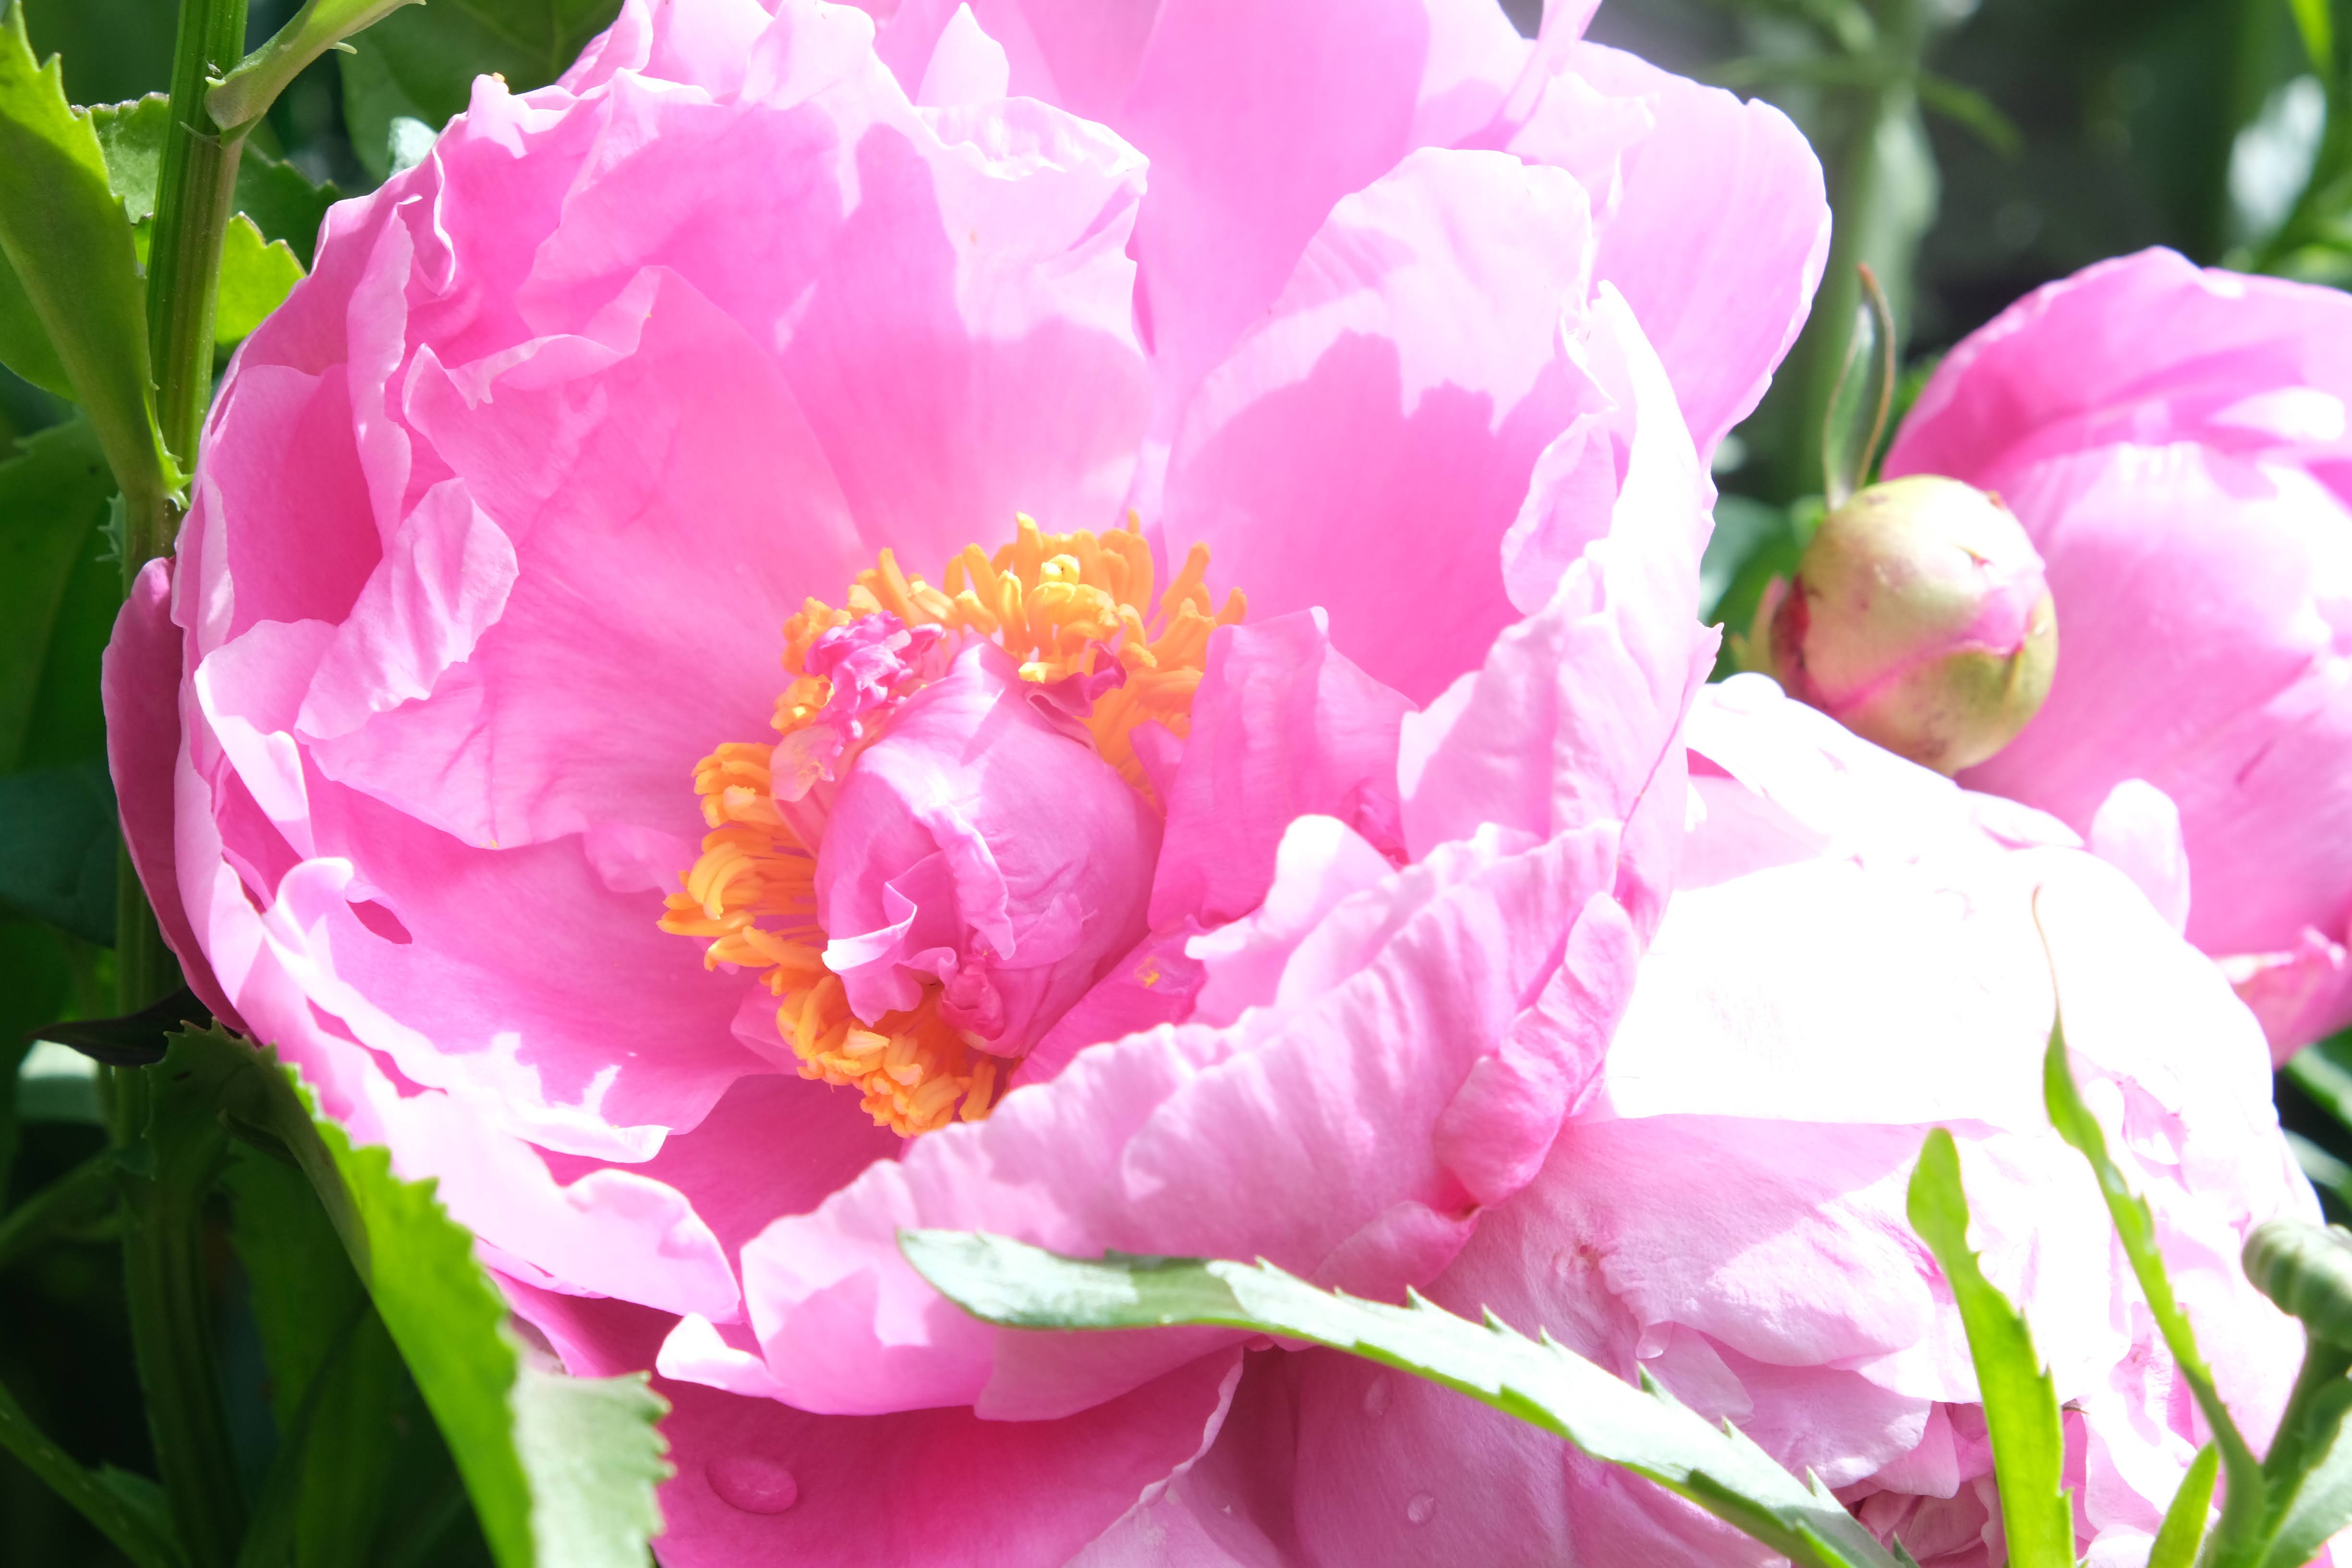 Image unrelated to post. A light pink peony in full bloom, close up.